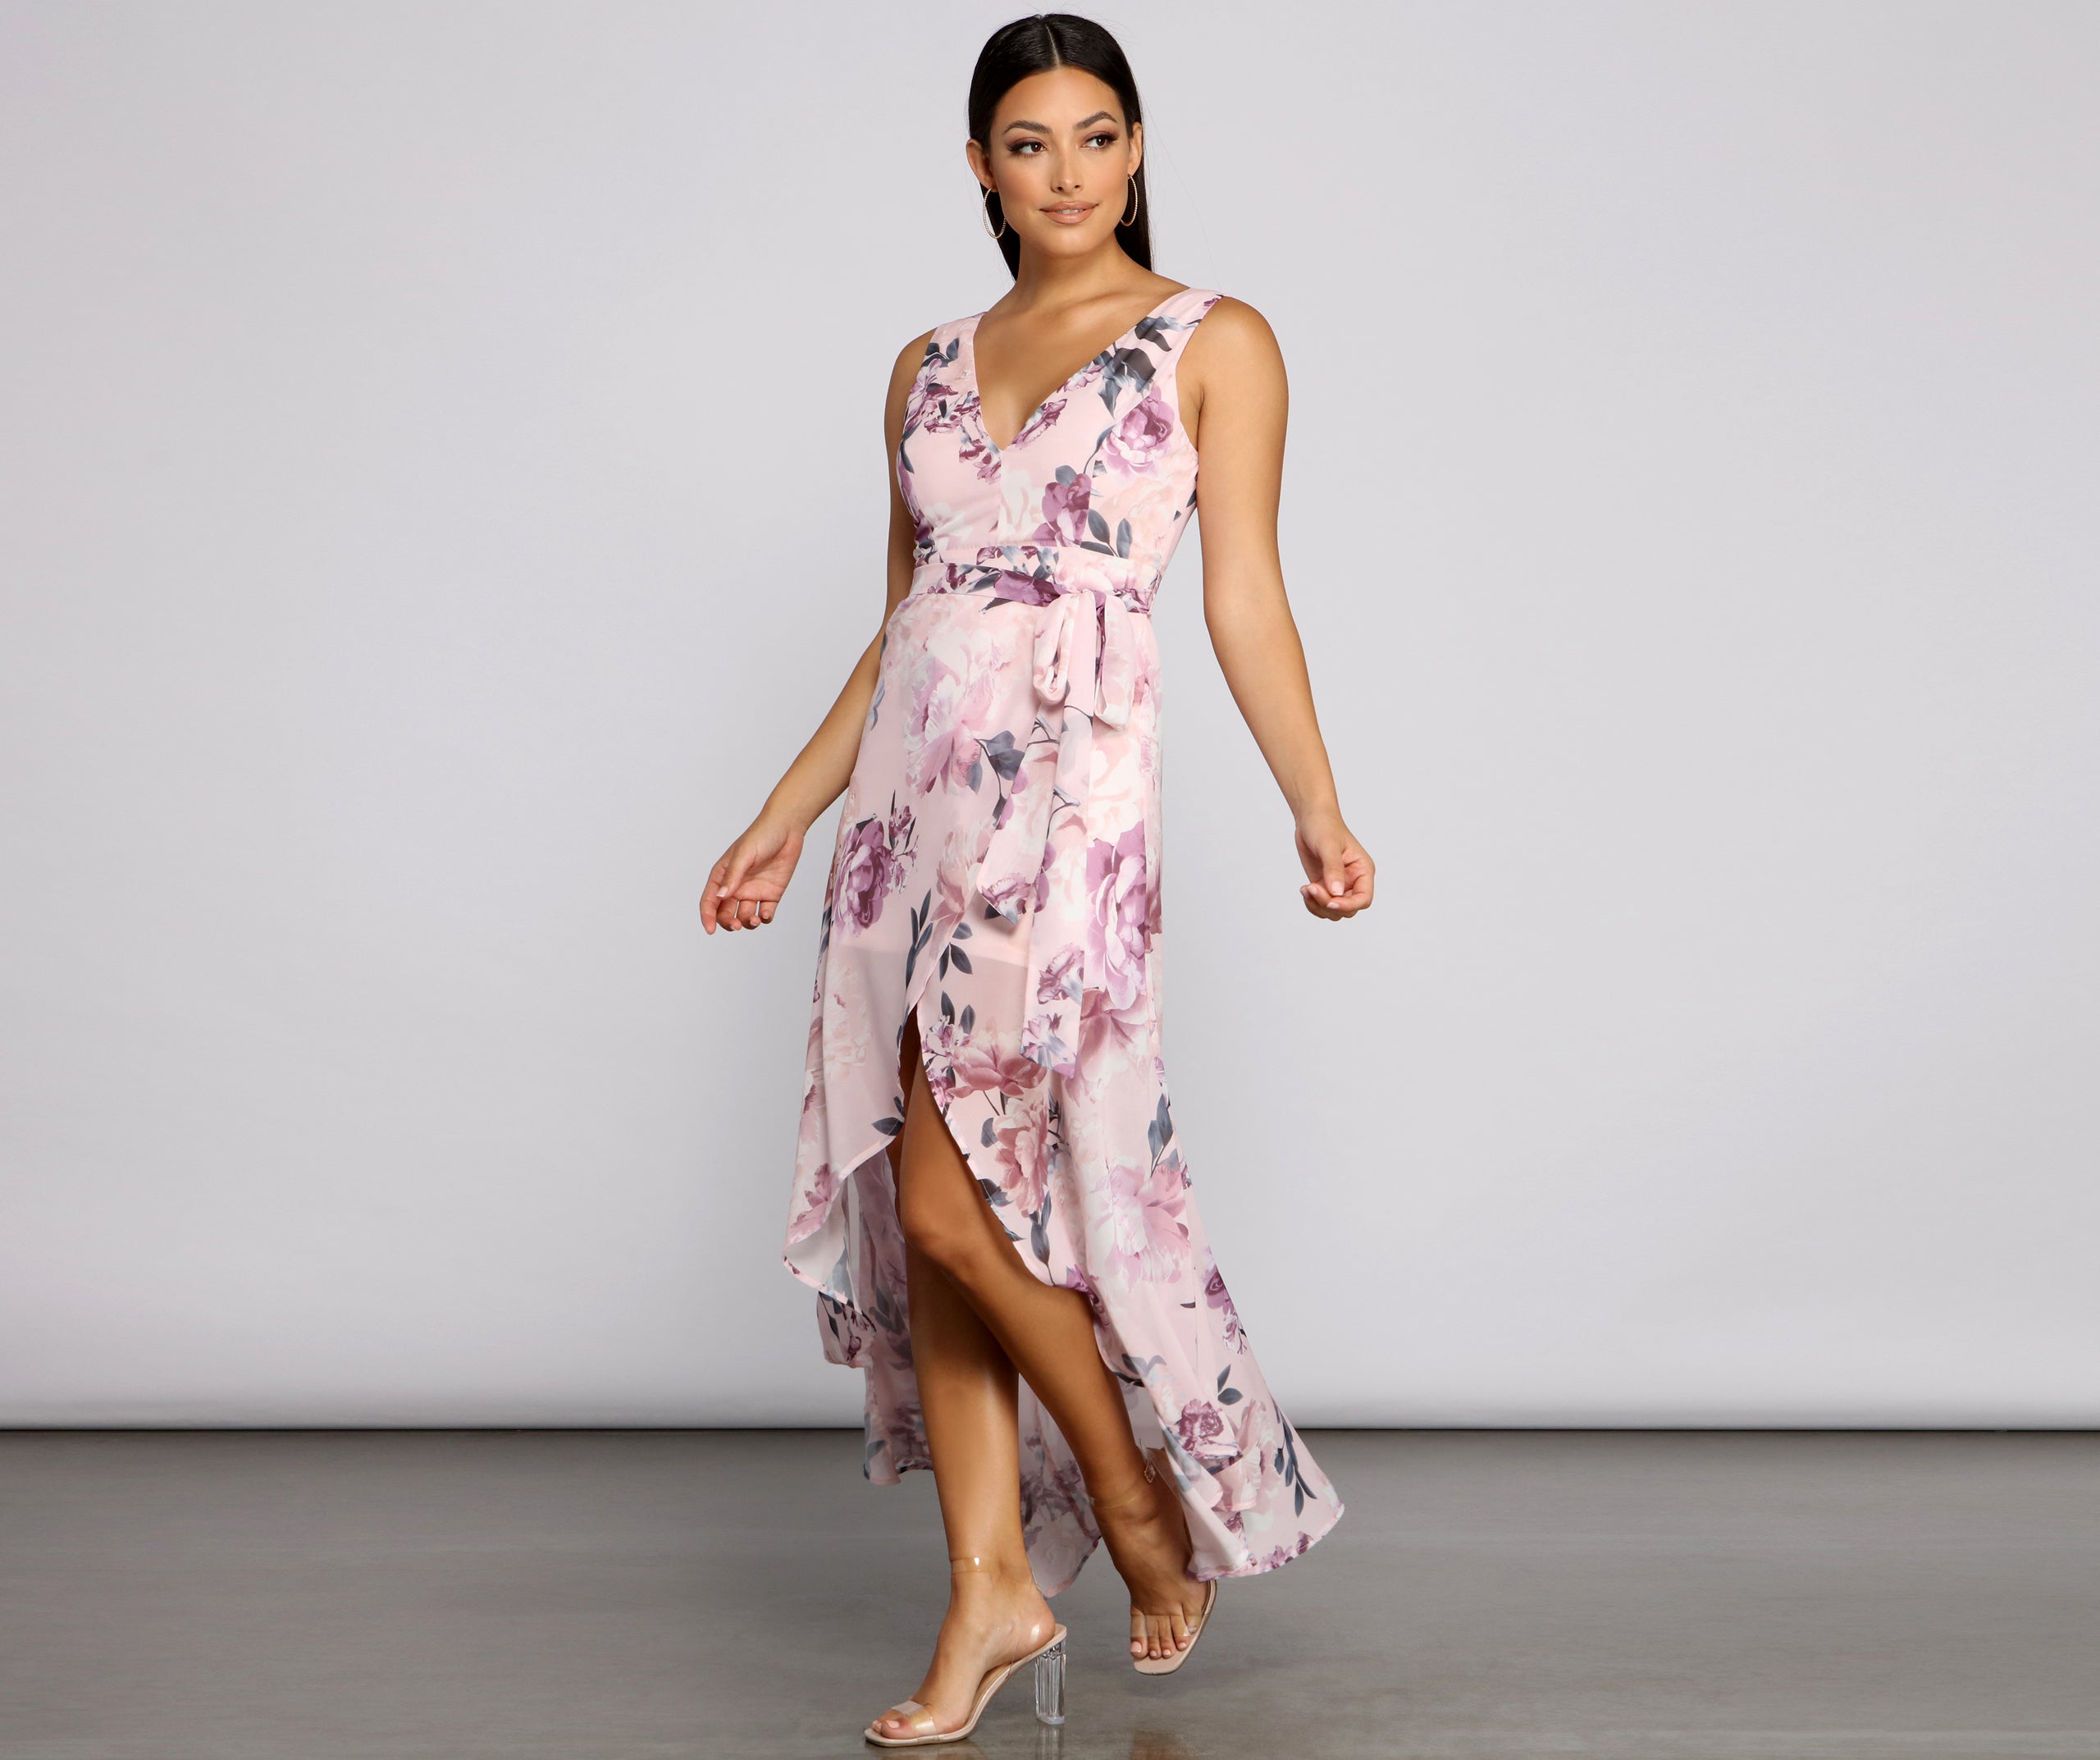 Wrapped In Romance Floral Chiffon Maxi Dress